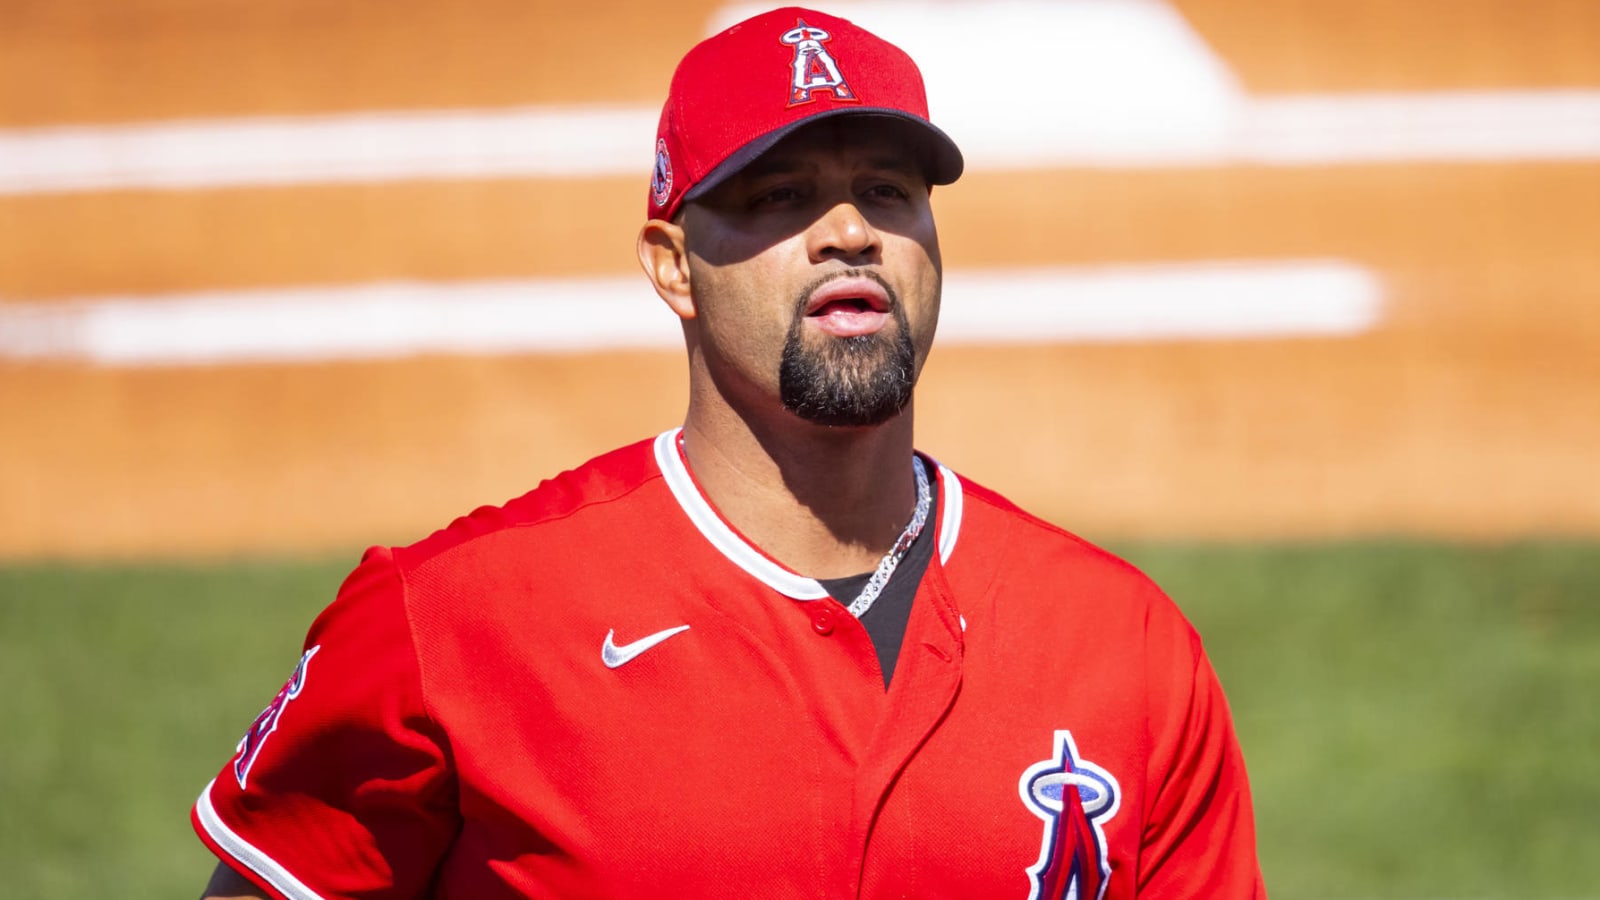 Albert Pujols clears waivers, becomes free agent